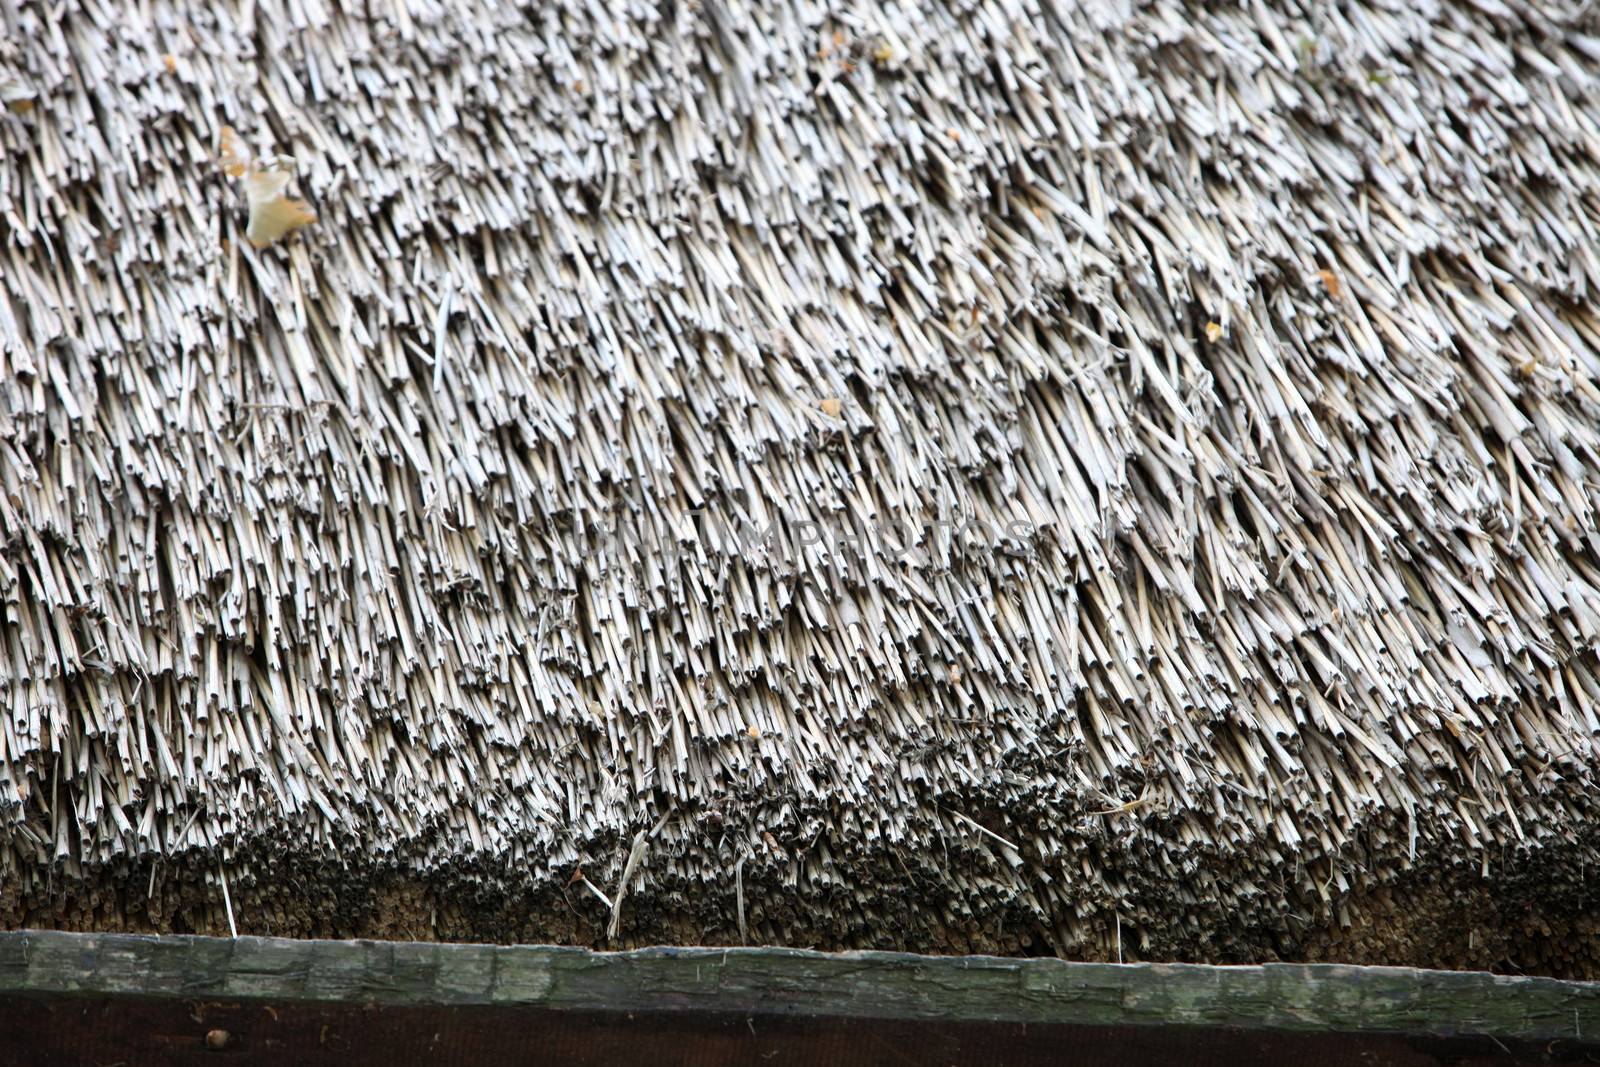 Close up of a thatch roof on a building showing the texture of the reeds